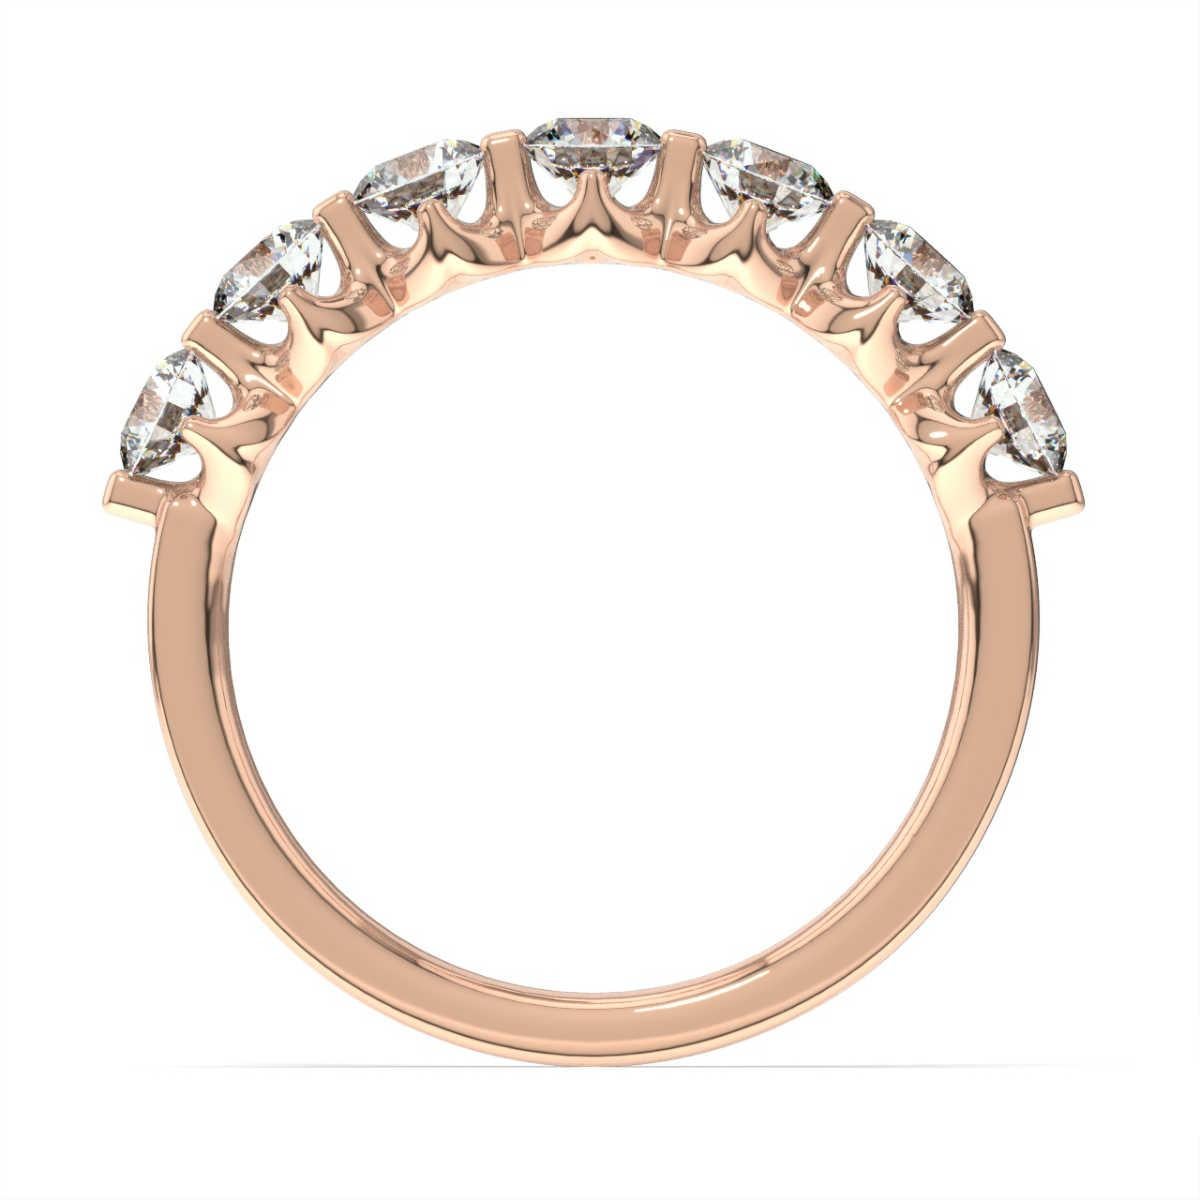 This ring features prong share 7 round brilliant diamonds. Experience the difference!

Product details: 

Center Gemstone Color: WHITE
Side Gemstone Type: NATURAL DIAMOND
Side Gemstone Shape: ROUND
Metal: 14K Rose Gold
Metal Weight: 2.21
Setting